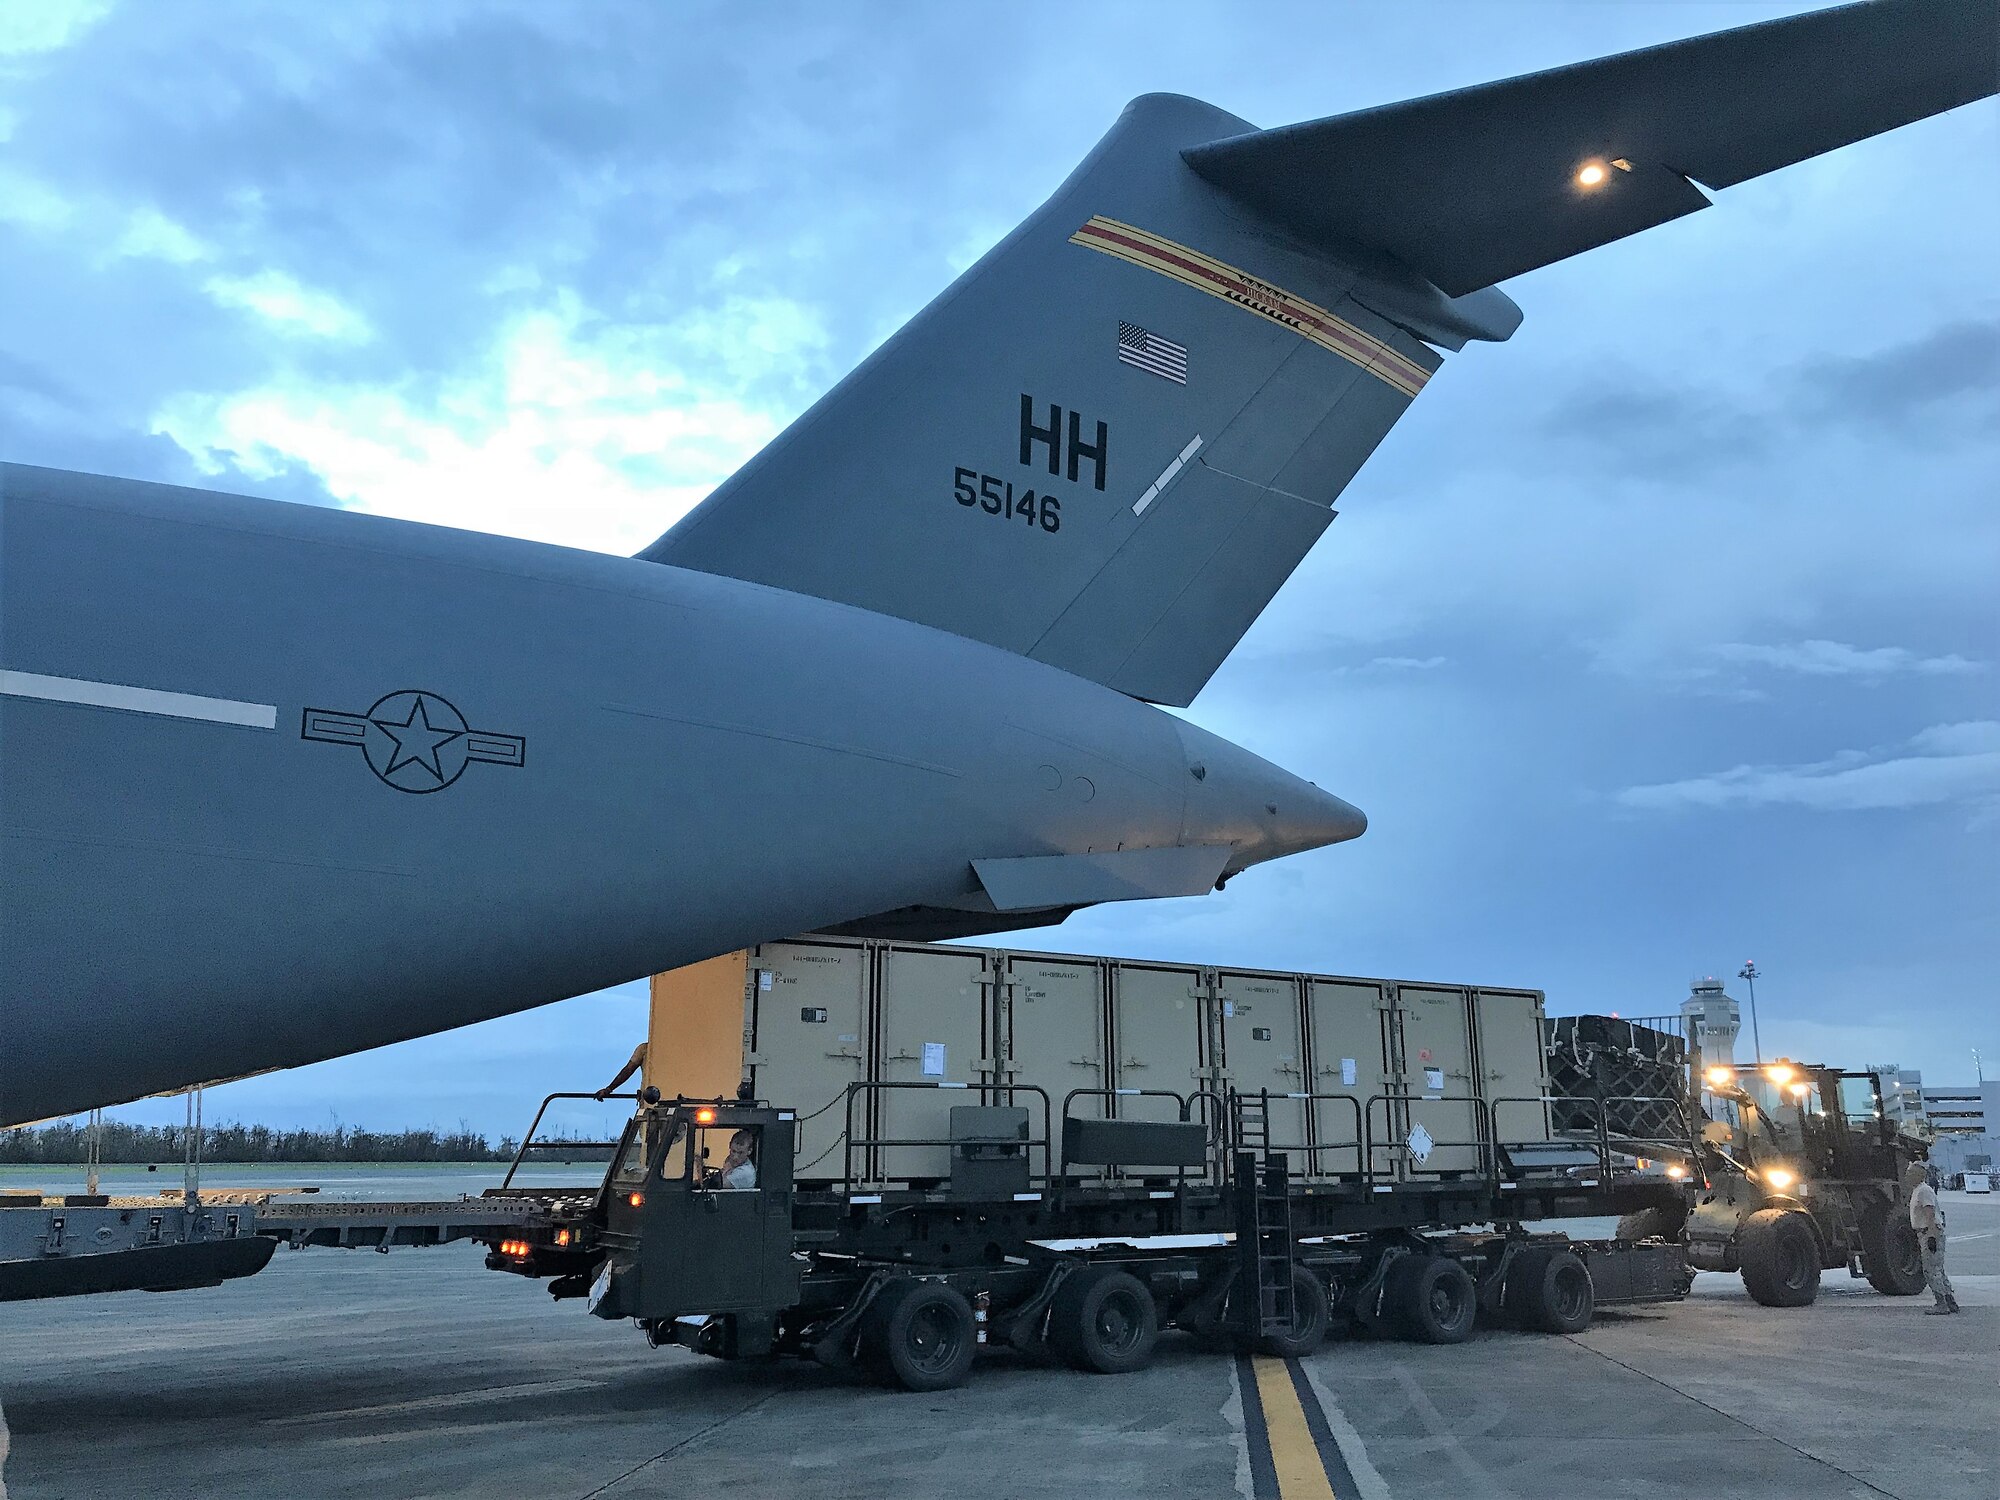 Cargo is offloaded out the back of a C-17 Globemaster III, San Juan International Airport, Oct. 8, 2017. The C-17 and crew were assigned to the Hawaii Air National Guard's 204th Airlift Squadron and were assisting with Hurricane Maria Relief efforts.